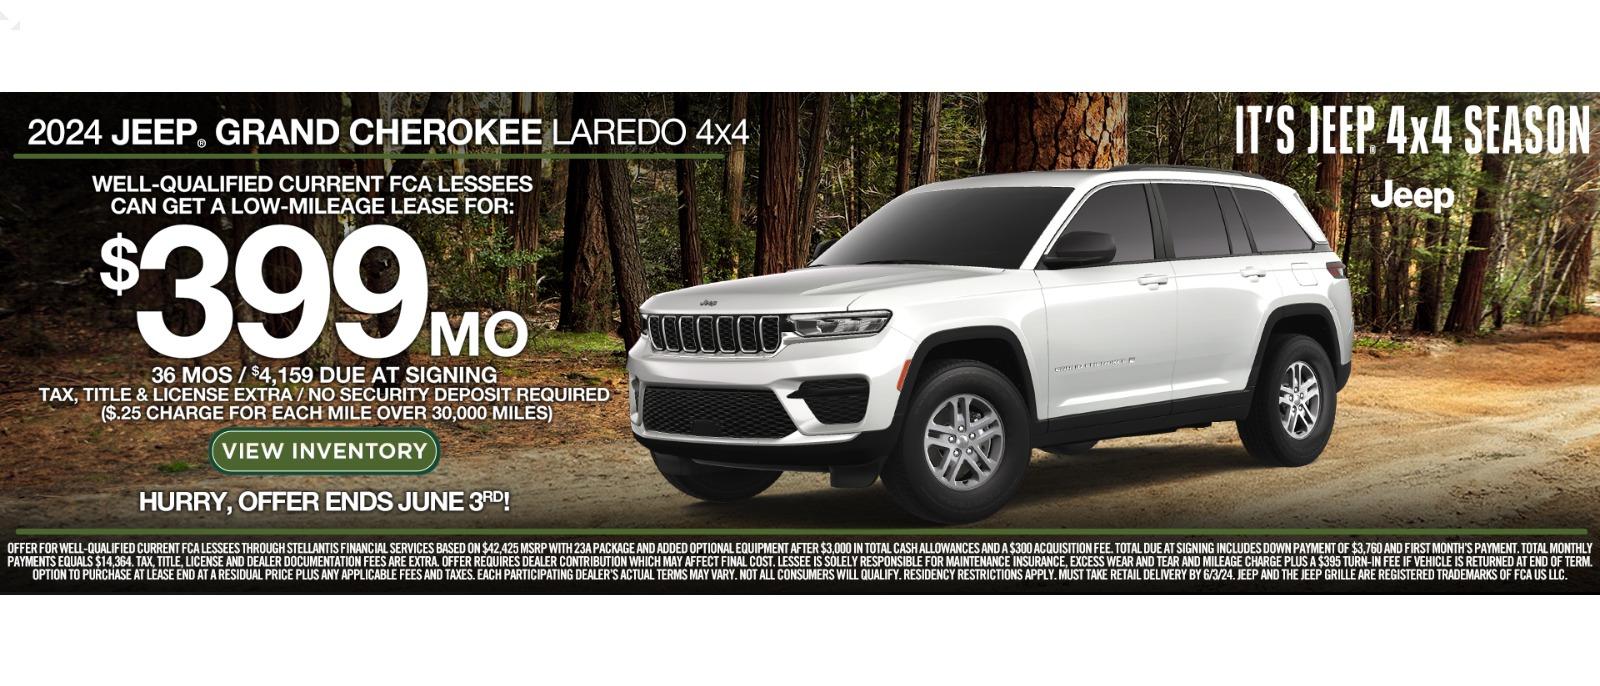 2024 Jeep Grand Cherokee Laredo 4x4
Well-qualified current FCA lessees can get a low-mileage lease for:
$399 MO
36 MOS/$4,159 due at signing
Tax, title & License extra / No security deposit required
($.25 chrge for each mile over 30,000 miles)